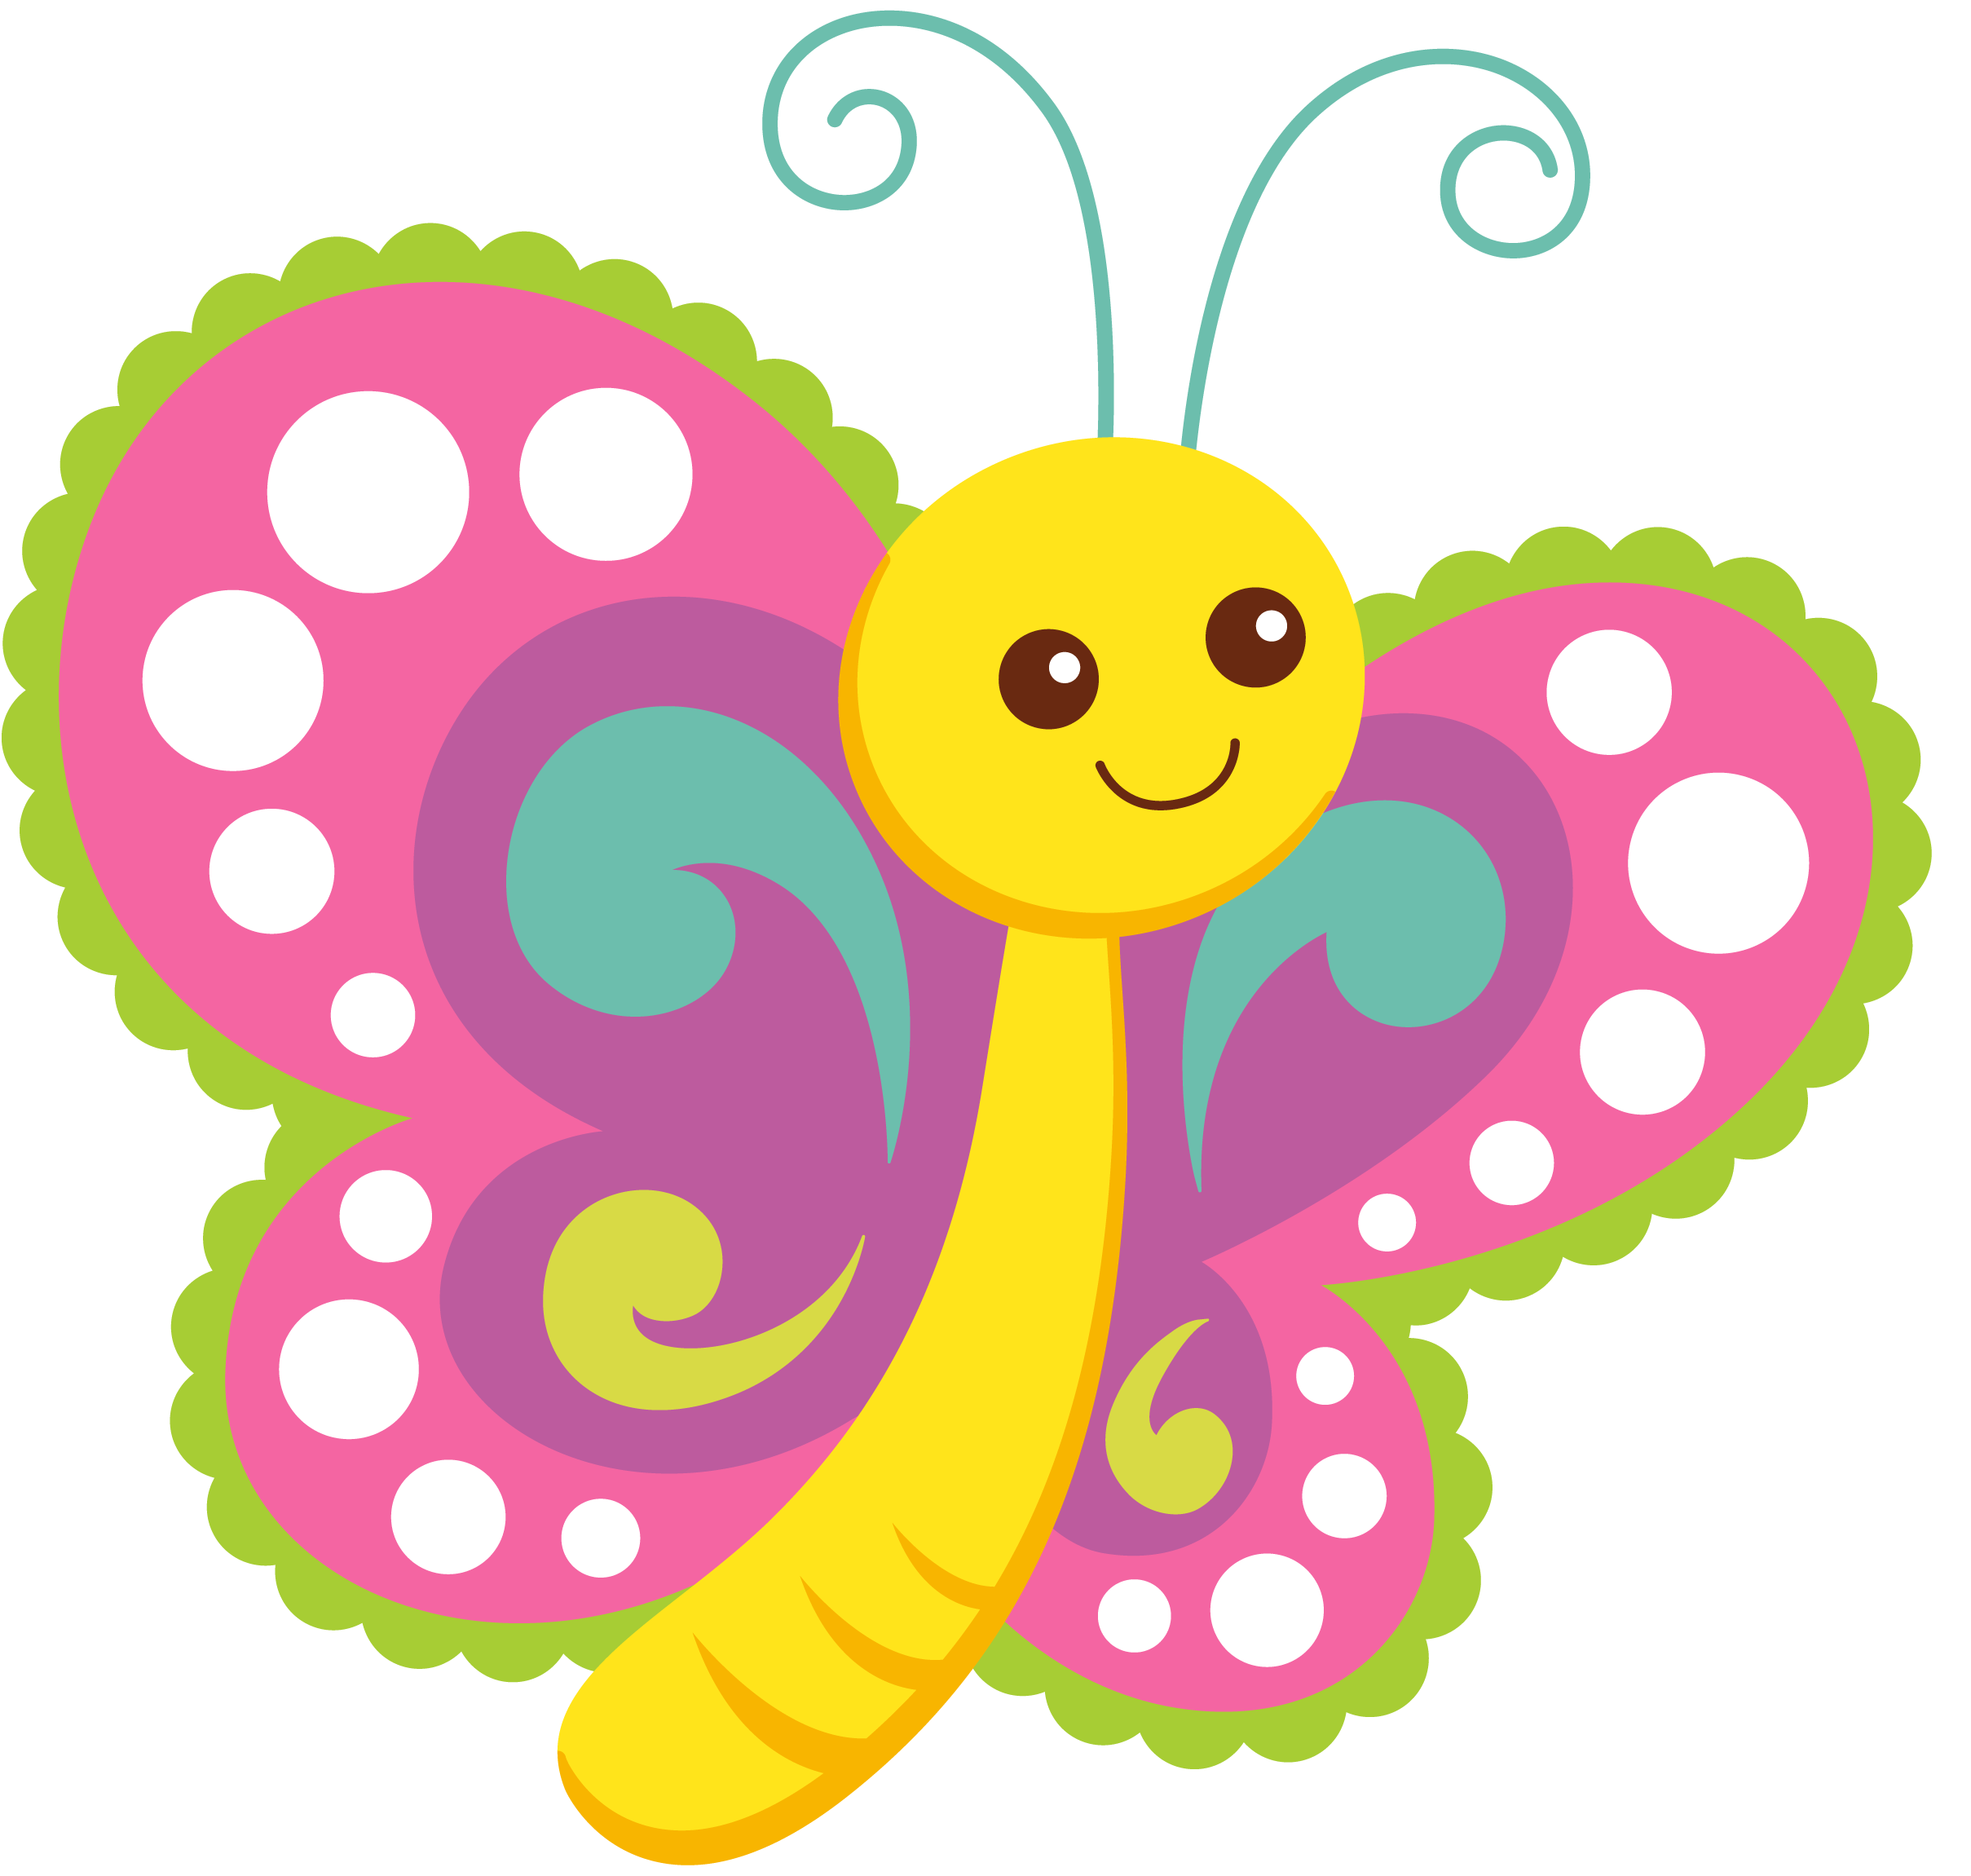 Easter clipart butterfly. Photo by daniellemoraesfalcao minus